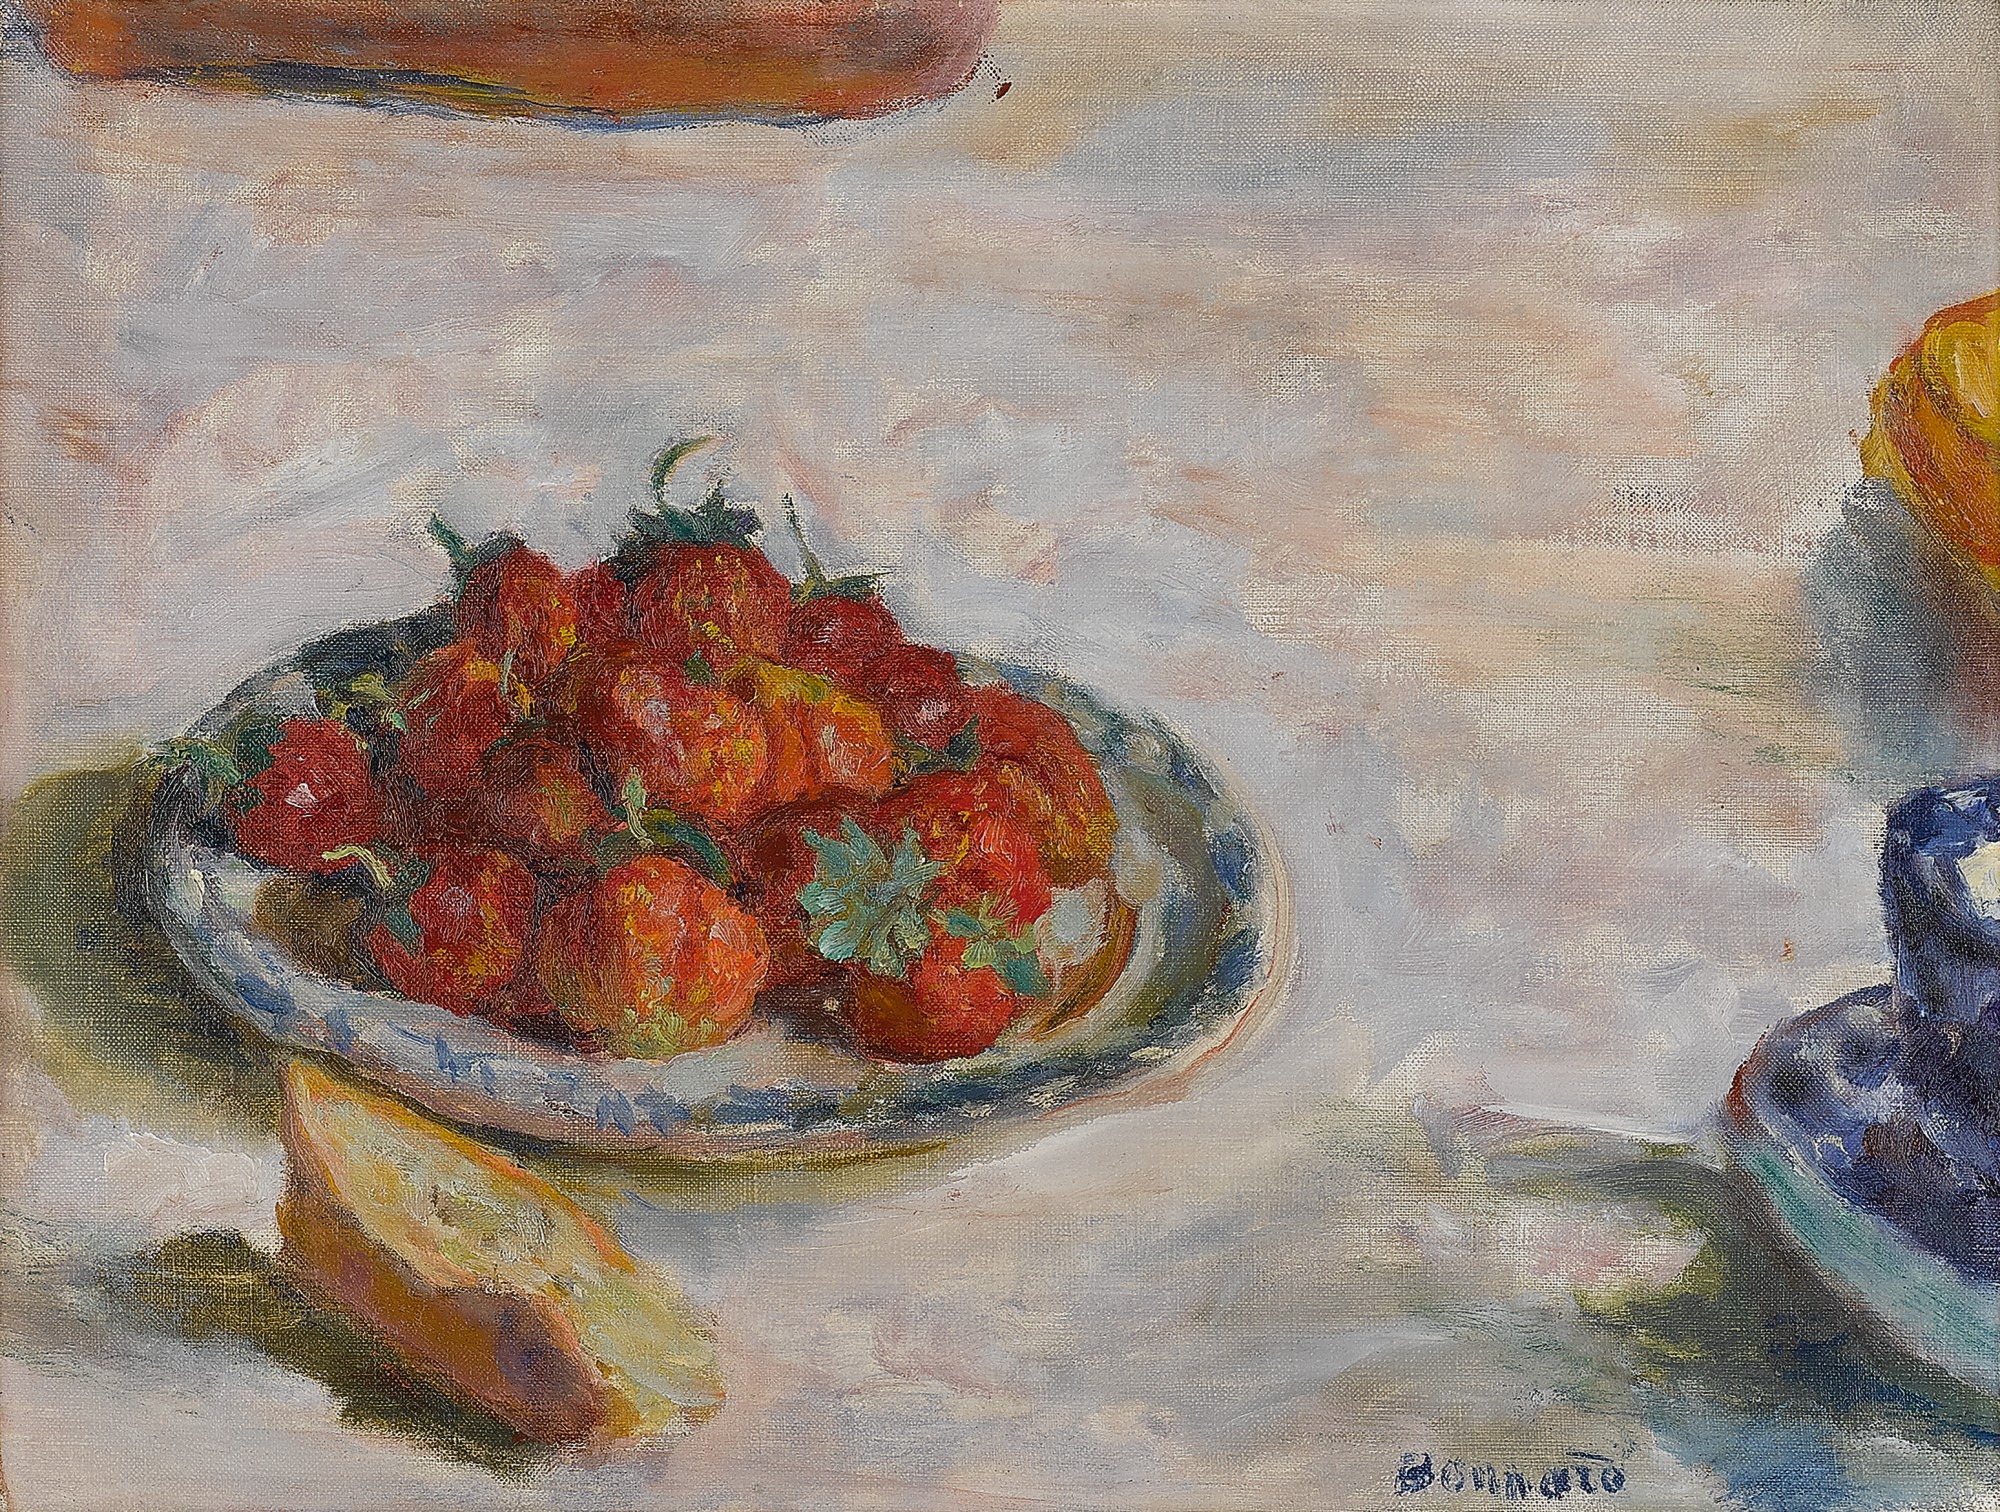 A Plate of Strawberries by Pierre Bonnard - 1922 - 29 cm x 39 cm private collection